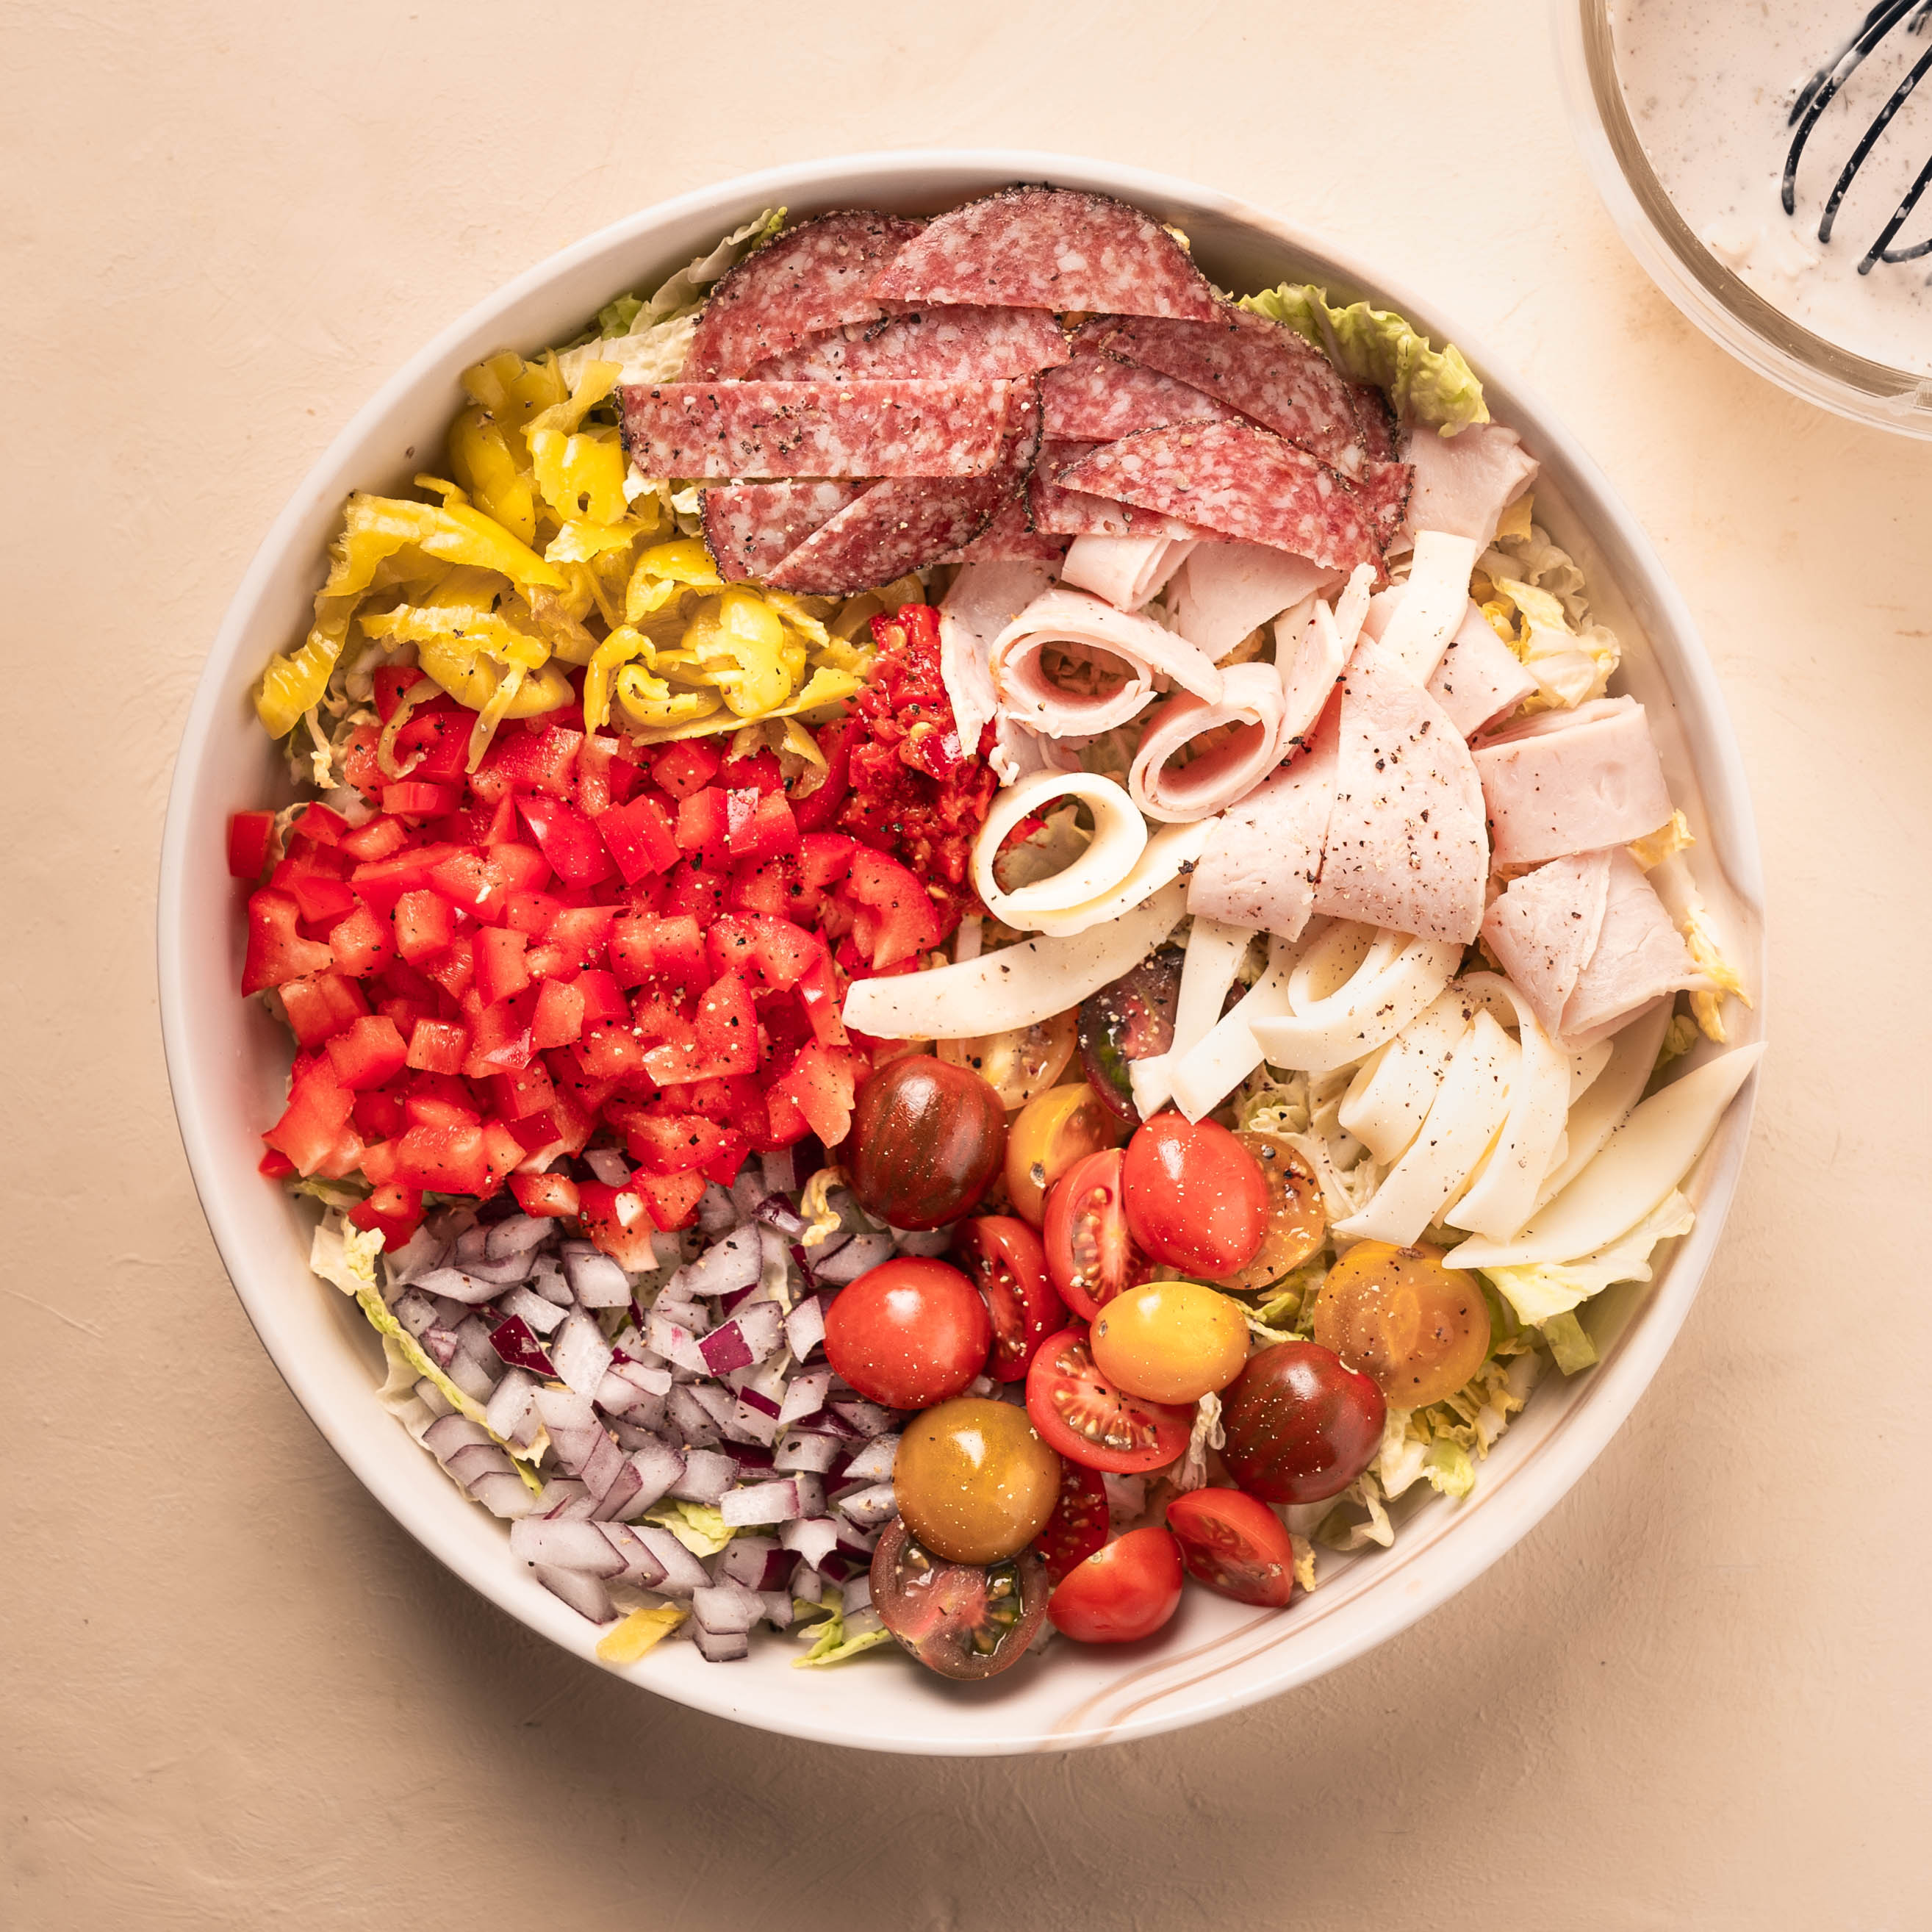 A Grinder Salad in a white bowl with deli meats, provolone cheese, various peppers, red onion, and tomatoes.